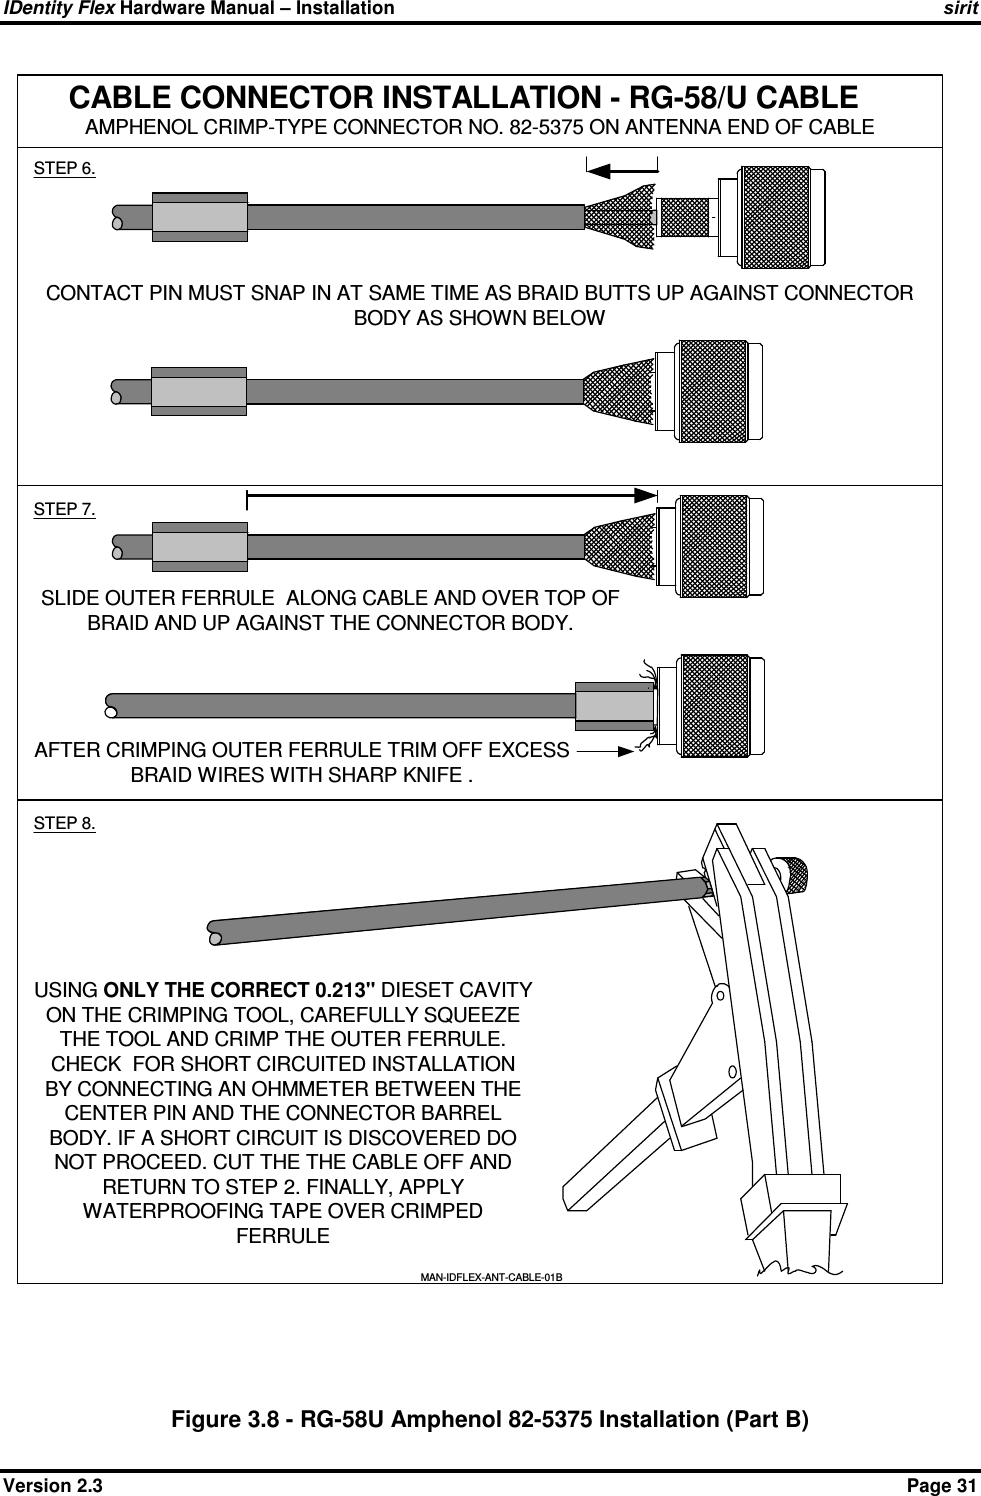 IDentity Flex Hardware Manual – Installation   sirit Version 2.3    Page 31 Figure 3.8 - RG-58U Amphenol 82-5375 Installation (Part B) CABLE CONNECTOR INSTALLATION - RG-58/U CABLEAMPHENOL CRIMP-TYPE CONNECTOR NO. 82-5375 ON ANTENNA END OF CABLESTEP 6.STEP 7.CONTACT PIN MUST SNAP IN AT SAME TIME AS BRAID BUTTS UP AGAINST CONNECTORBODY AS SHOWN BELOWSLIDE OUTER FERRULE  ALONG CABLE AND OVER TOP OFBRAID AND UP AGAINST THE CONNECTOR BODY.STEP 8.USING ONLY THE CORRECT 0.213&quot; DIESET CAVITYON THE CRIMPING TOOL, CAREFULLY SQUEEZETHE TOOL AND CRIMP THE OUTER FERRULE.CHECK  FOR SHORT CIRCUITED INSTALLATIONBY CONNECTING AN OHMMETER BETWEEN THECENTER PIN AND THE CONNECTOR BARRELBODY. IF A SHORT CIRCUIT IS DISCOVERED DONOT PROCEED. CUT THE THE CABLE OFF ANDRETURN TO STEP 2. FINALLY, APPLYWATERPROOFING TAPE OVER CRIMPEDFERRULEMAN-IDFLEX-ANT-CABLE-01BAFTER CRIMPING OUTER FERRULE TRIM OFF EXCESSBRAID WIRES WITH SHARP KNIFE .